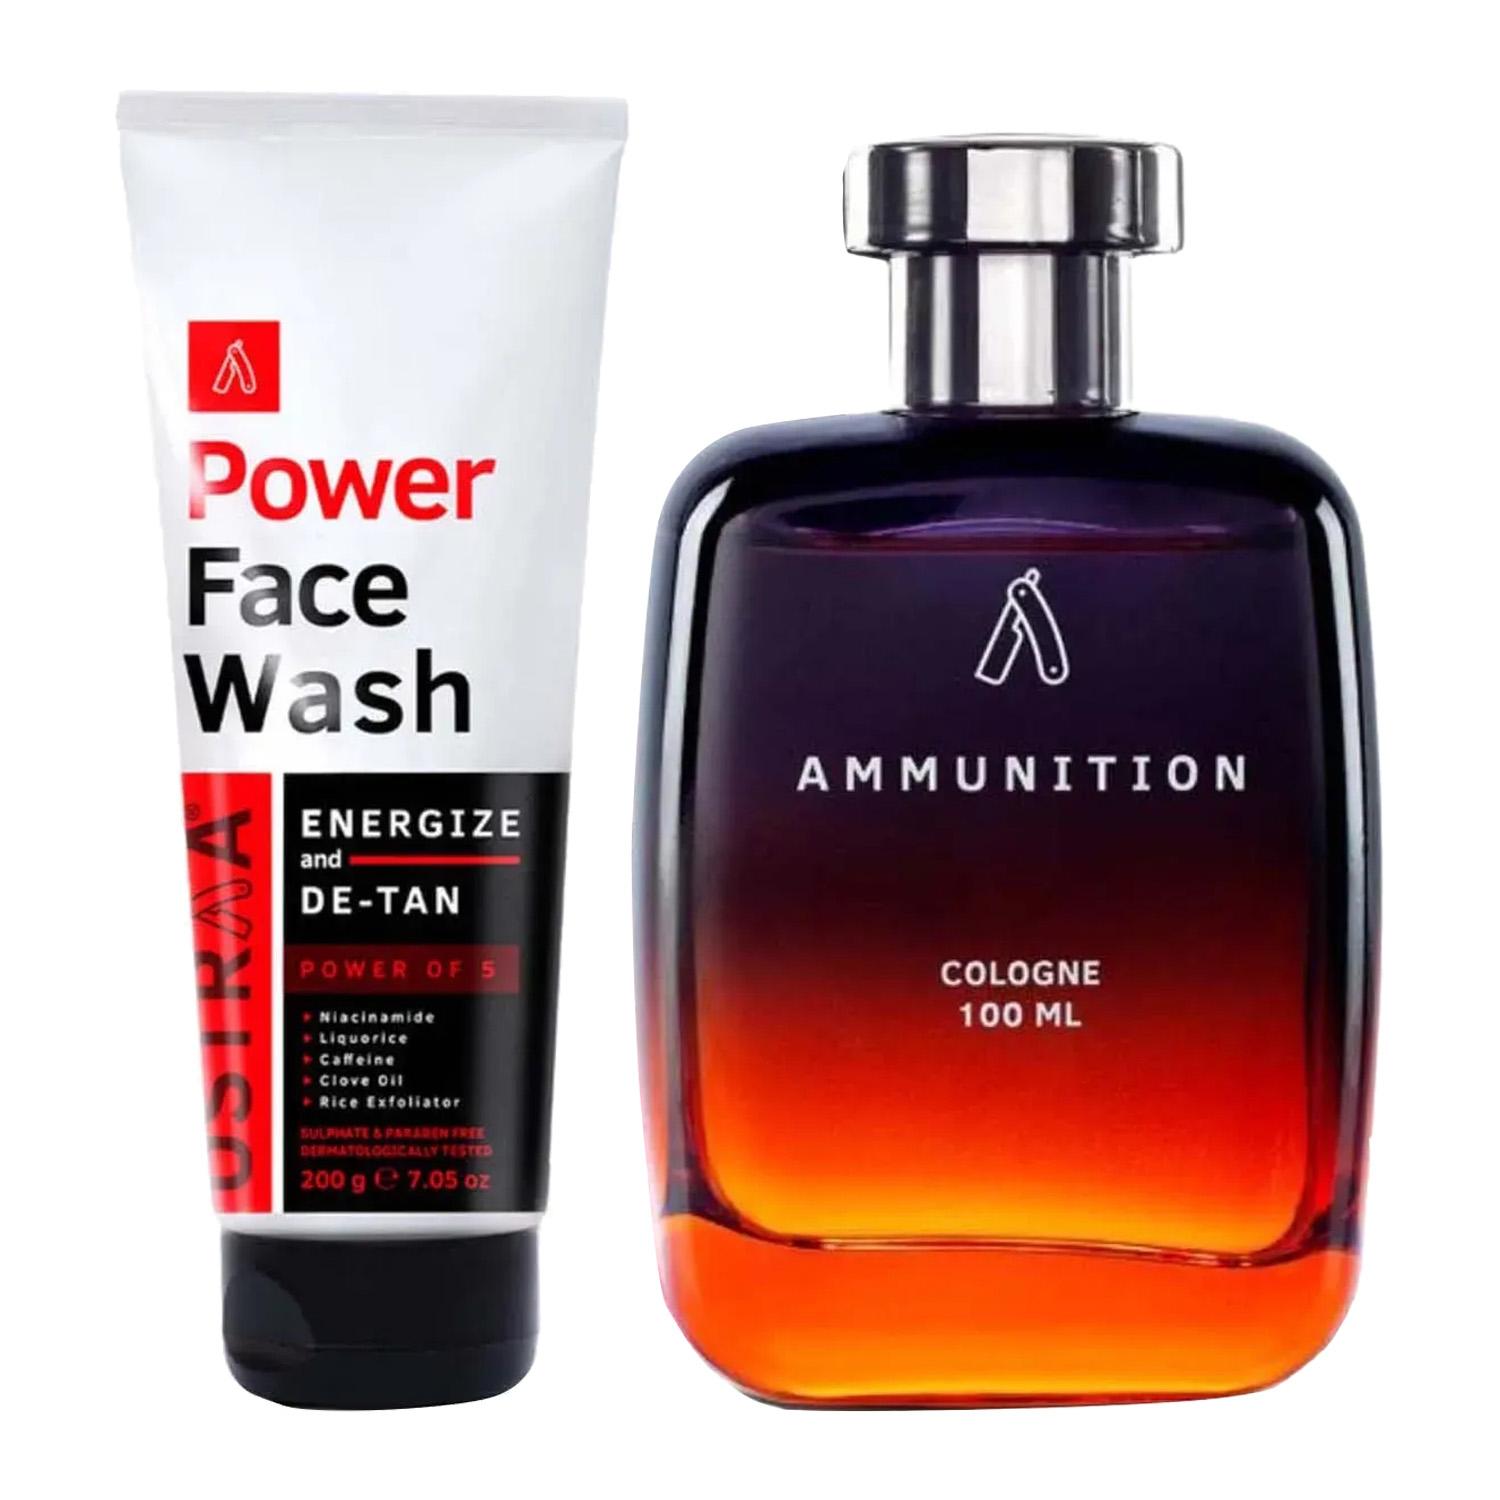 Ustraa | Ustraa Energize And De-Tan Power Face Wash (200 g) & Cologne For Men Ammunition (100 ml) Combo